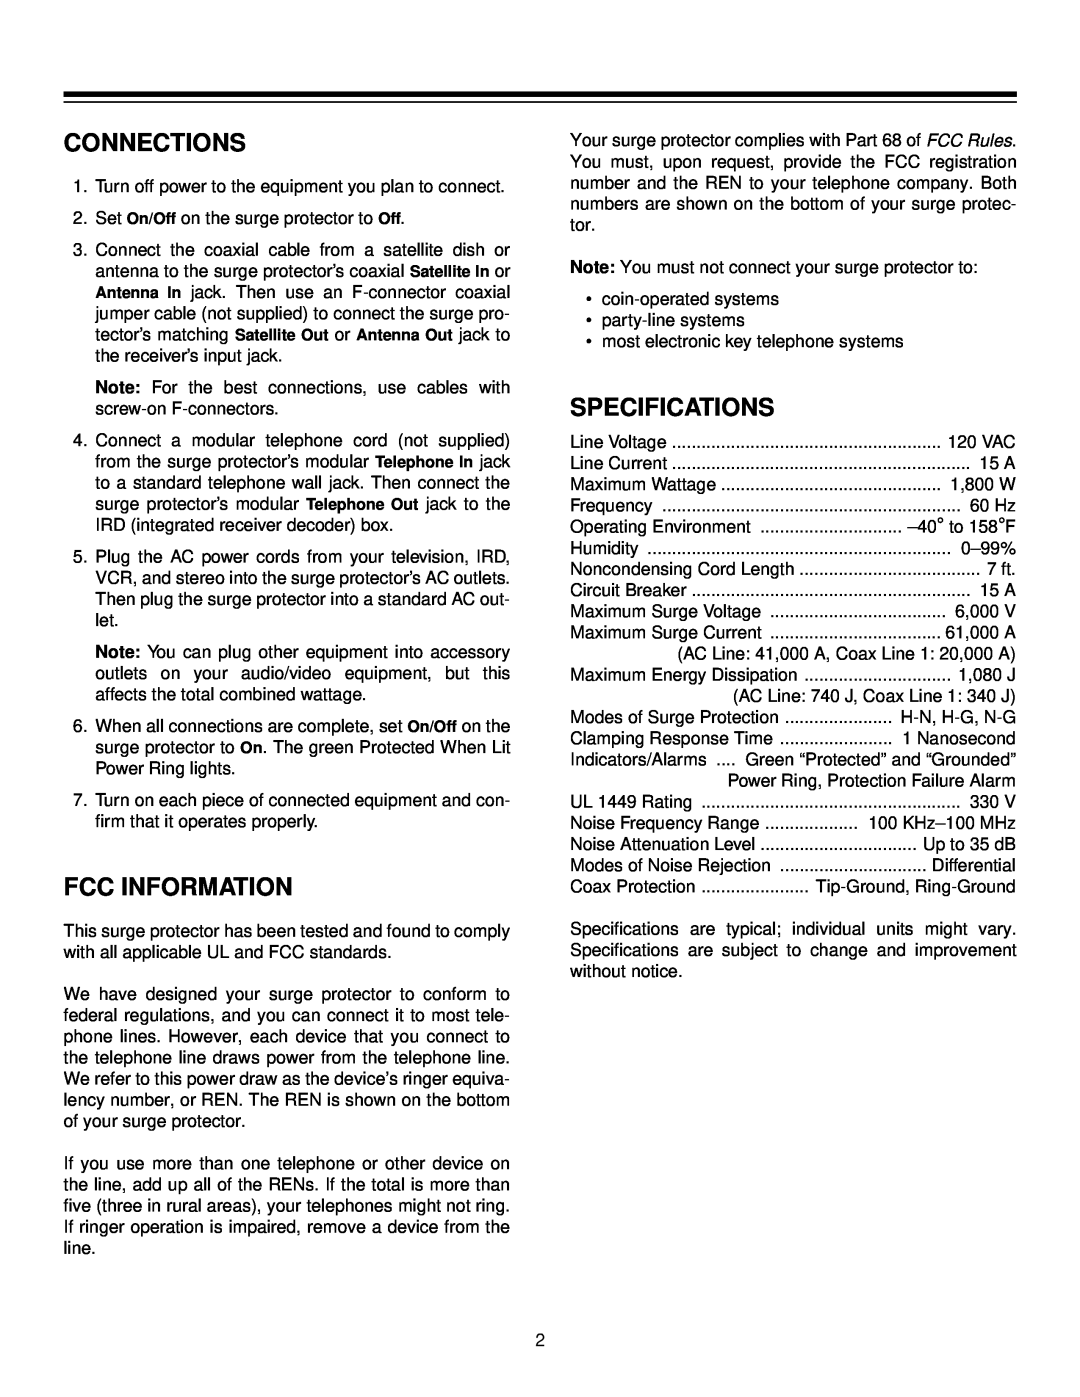 Radio Shack 61-2338 specifications Connections, Fcc Information, Specifications, Noise Frequency Range 